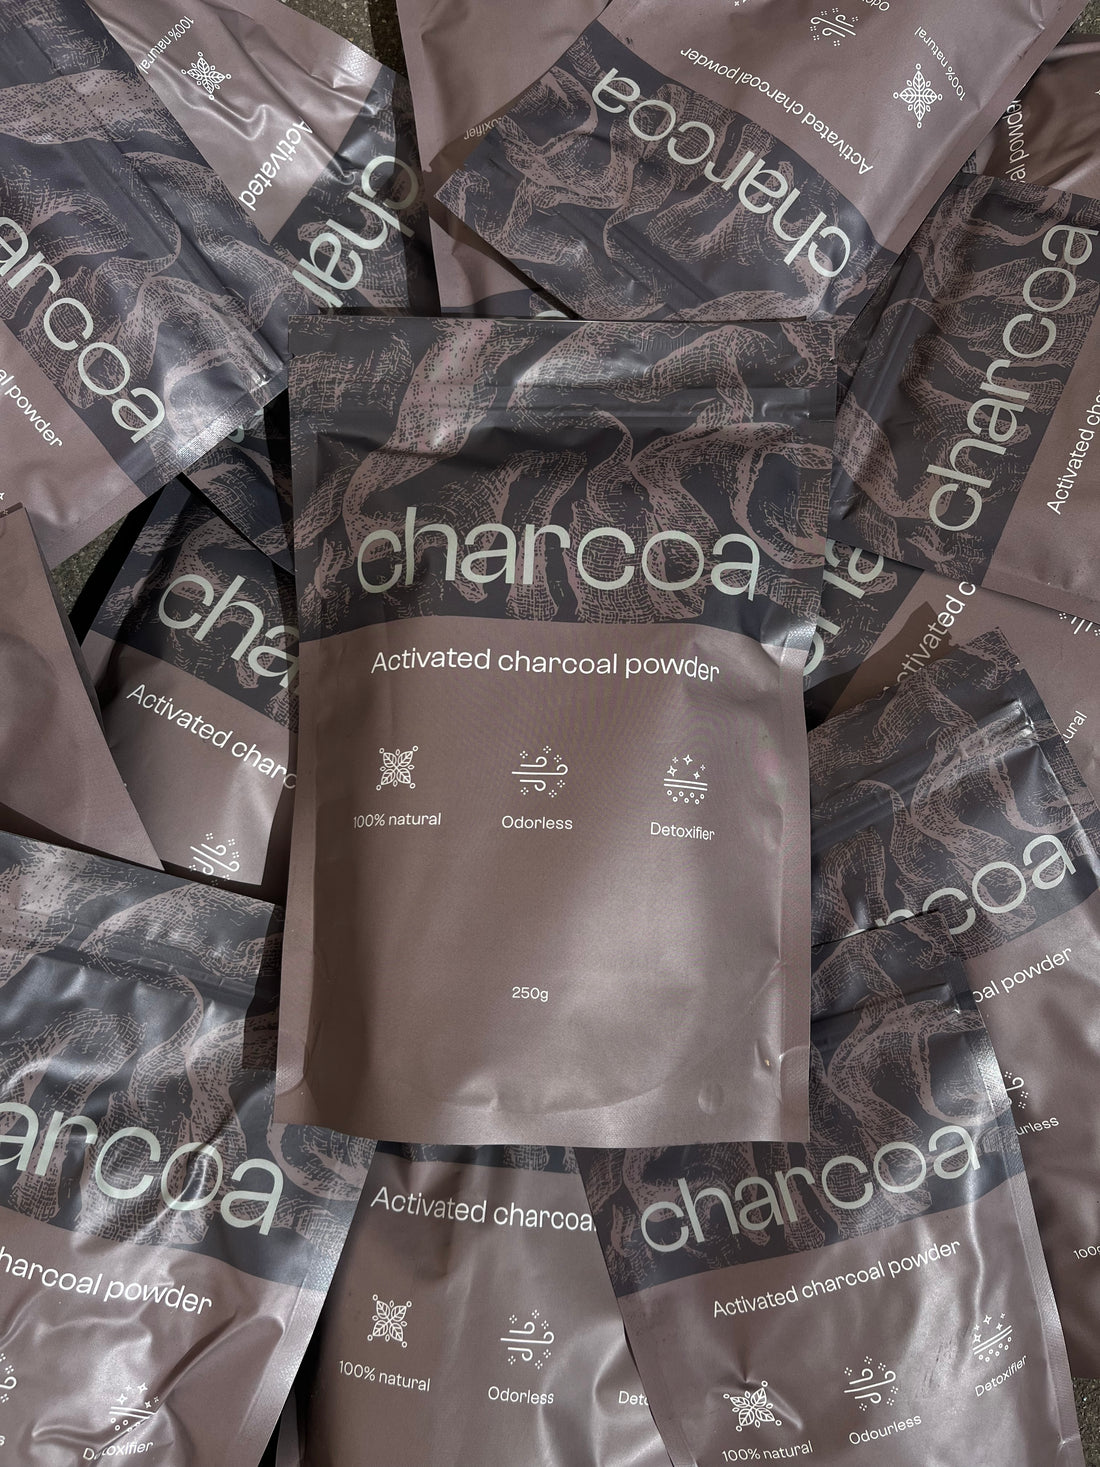 Charcoa activated charcoal